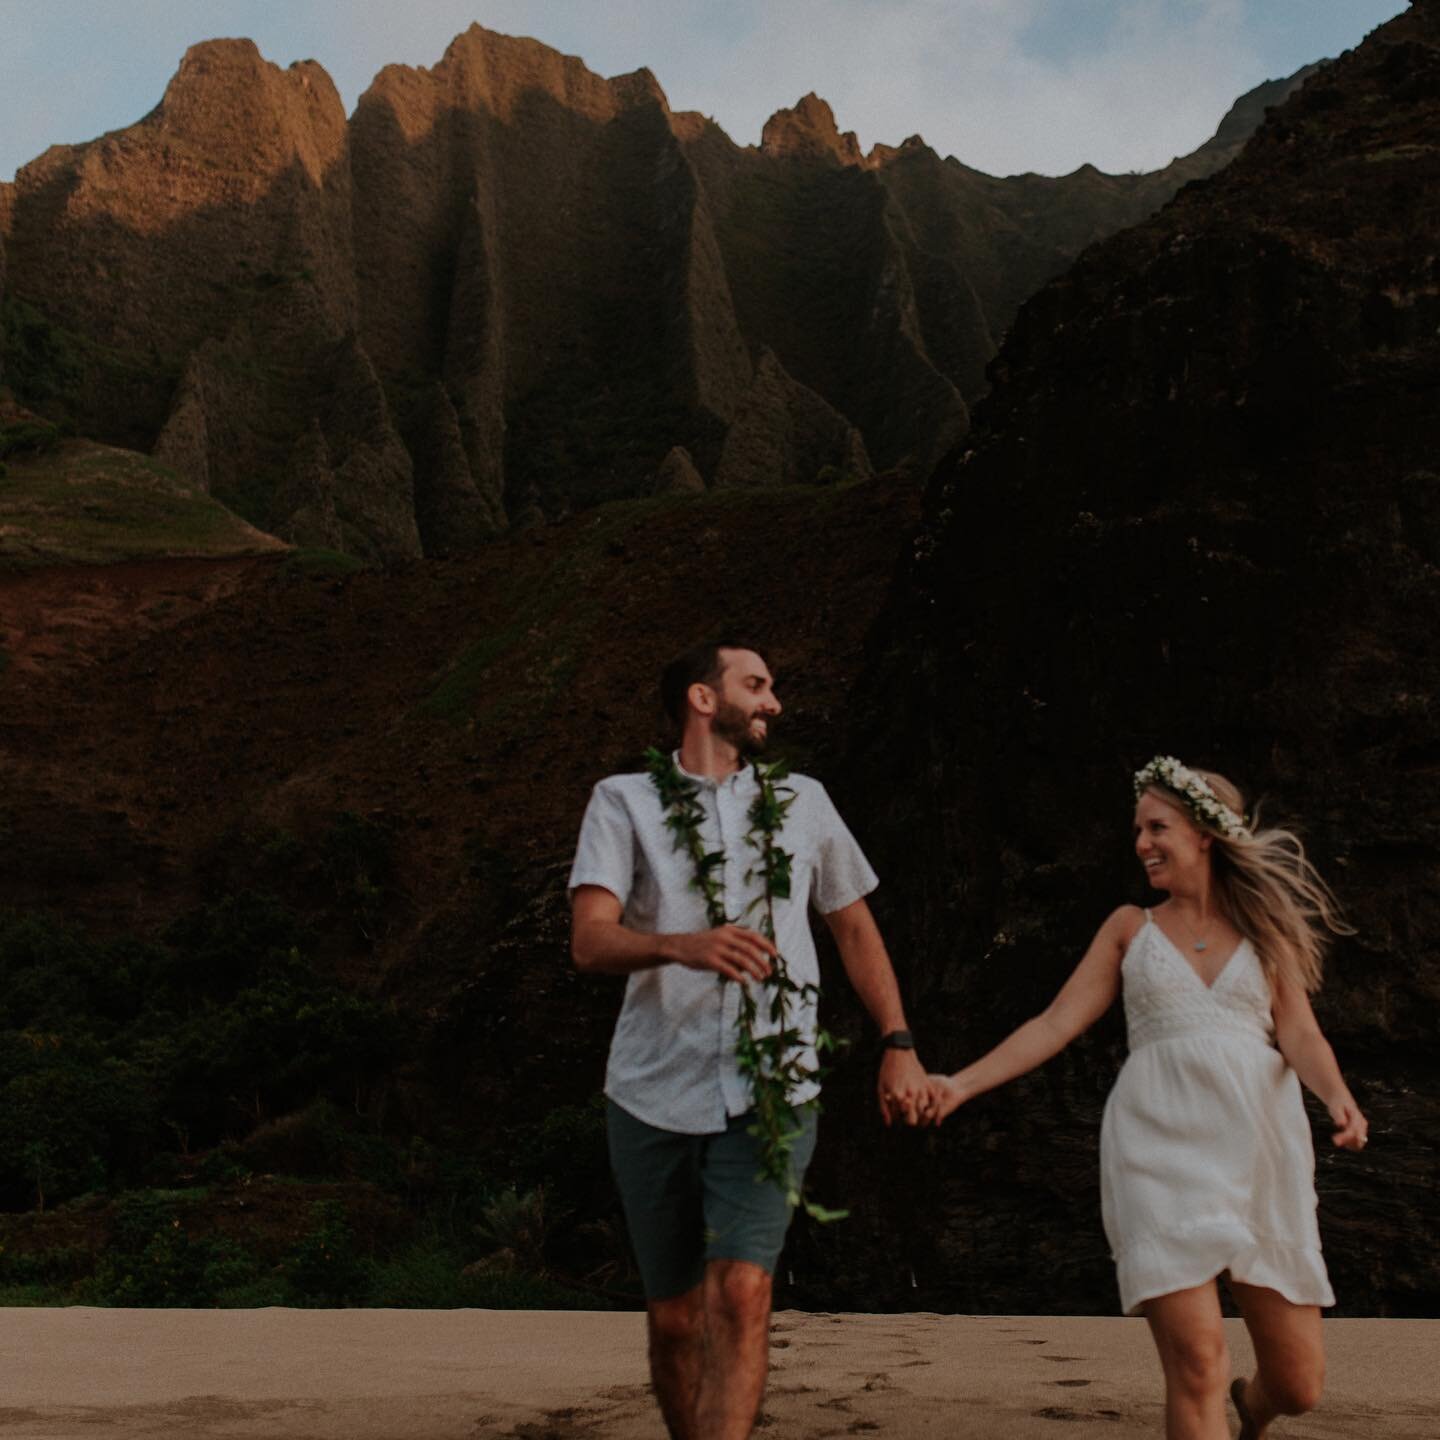 BACKPACKING WEDDING OF THE CENTURY: ✨
Kate + Bryan &amp; their 6 best friends backpacked 22 miles along the coast of Hawaii (20 lbs of tea lights and all, s/o to @thisismygarrett) to get hitched. 

Can you believe they had just finished climbing 3,00